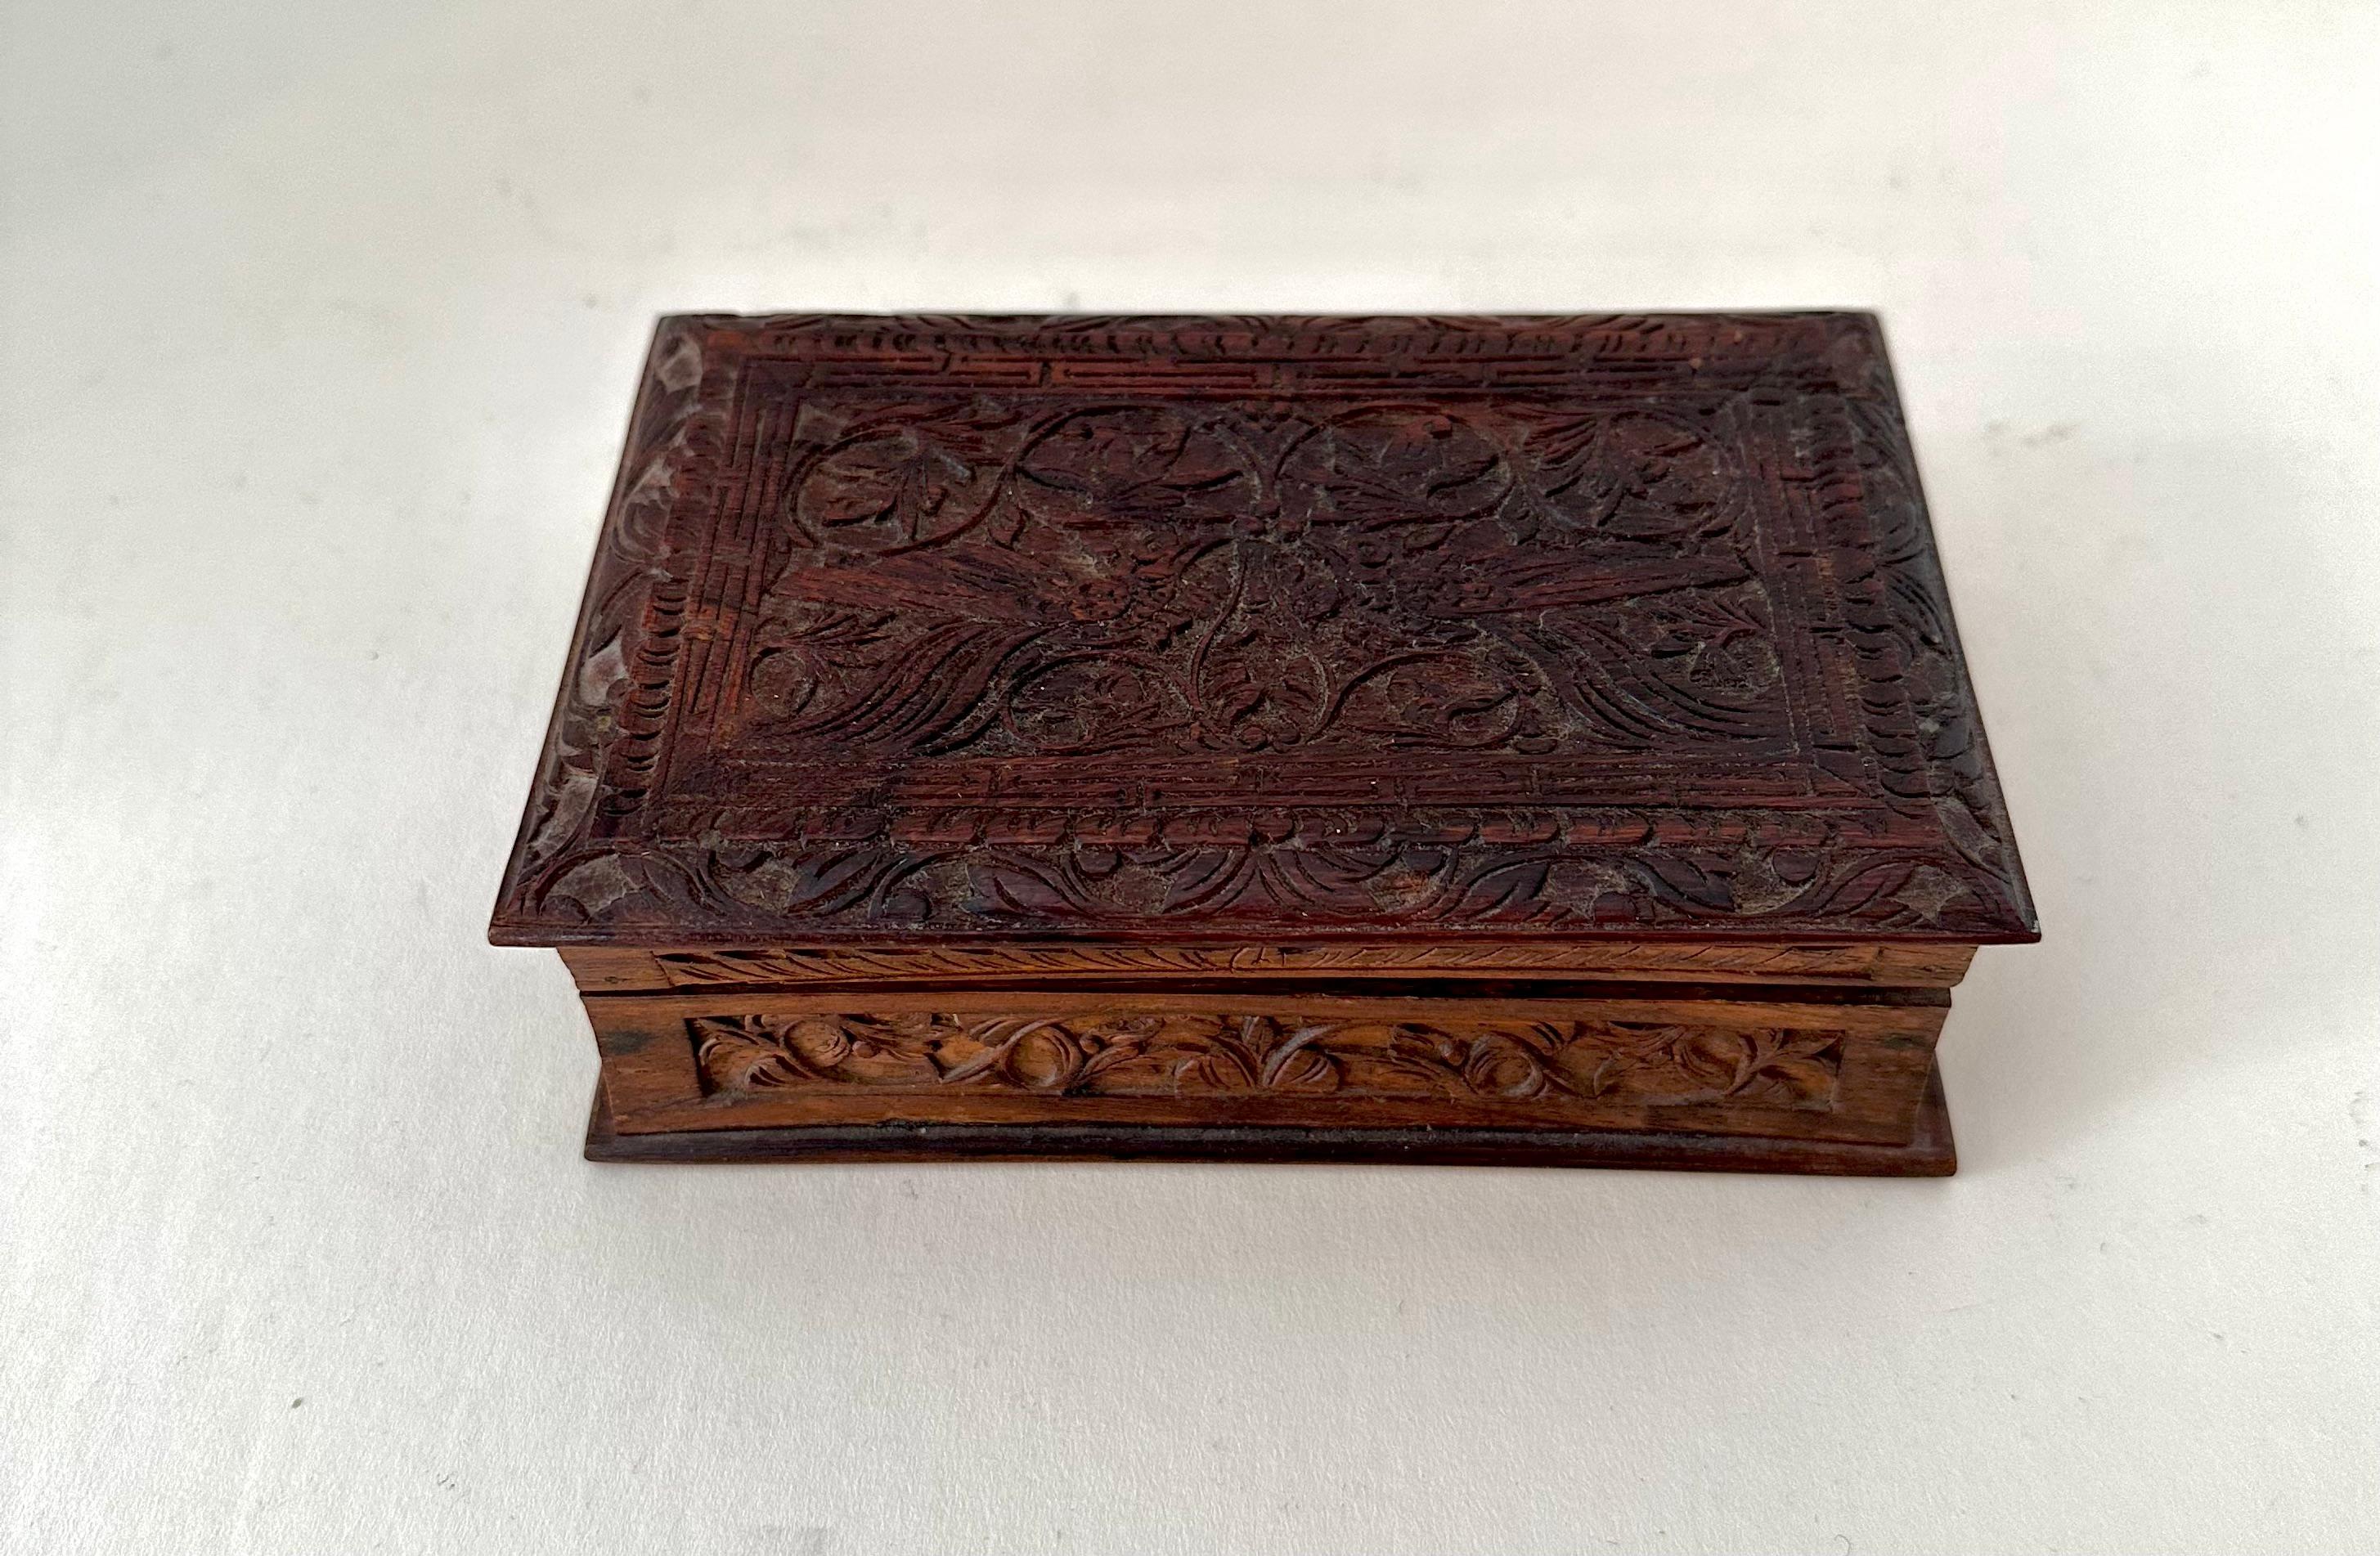 A simple hinged wooden box with carving. The box would be ideal for 420, notes, recipes, or on the desk to hold paper clips, rubber bands, etc. or on the nightstand. 

A beautiful box with a lot of character.